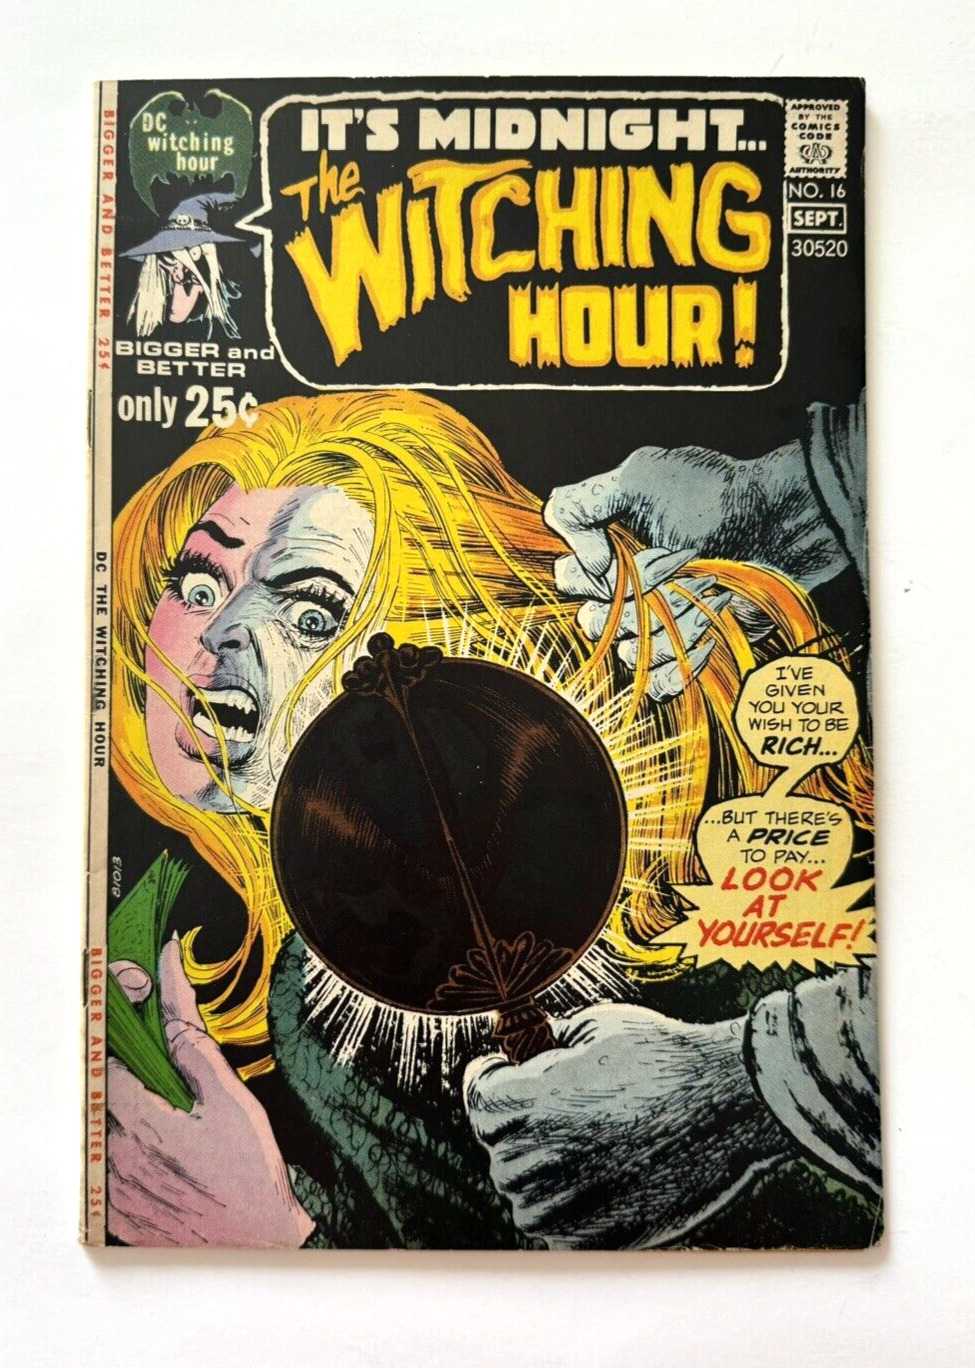 The Witching Hour #16 (DC Comics 1971) Horror Supernatural early Bronze Age